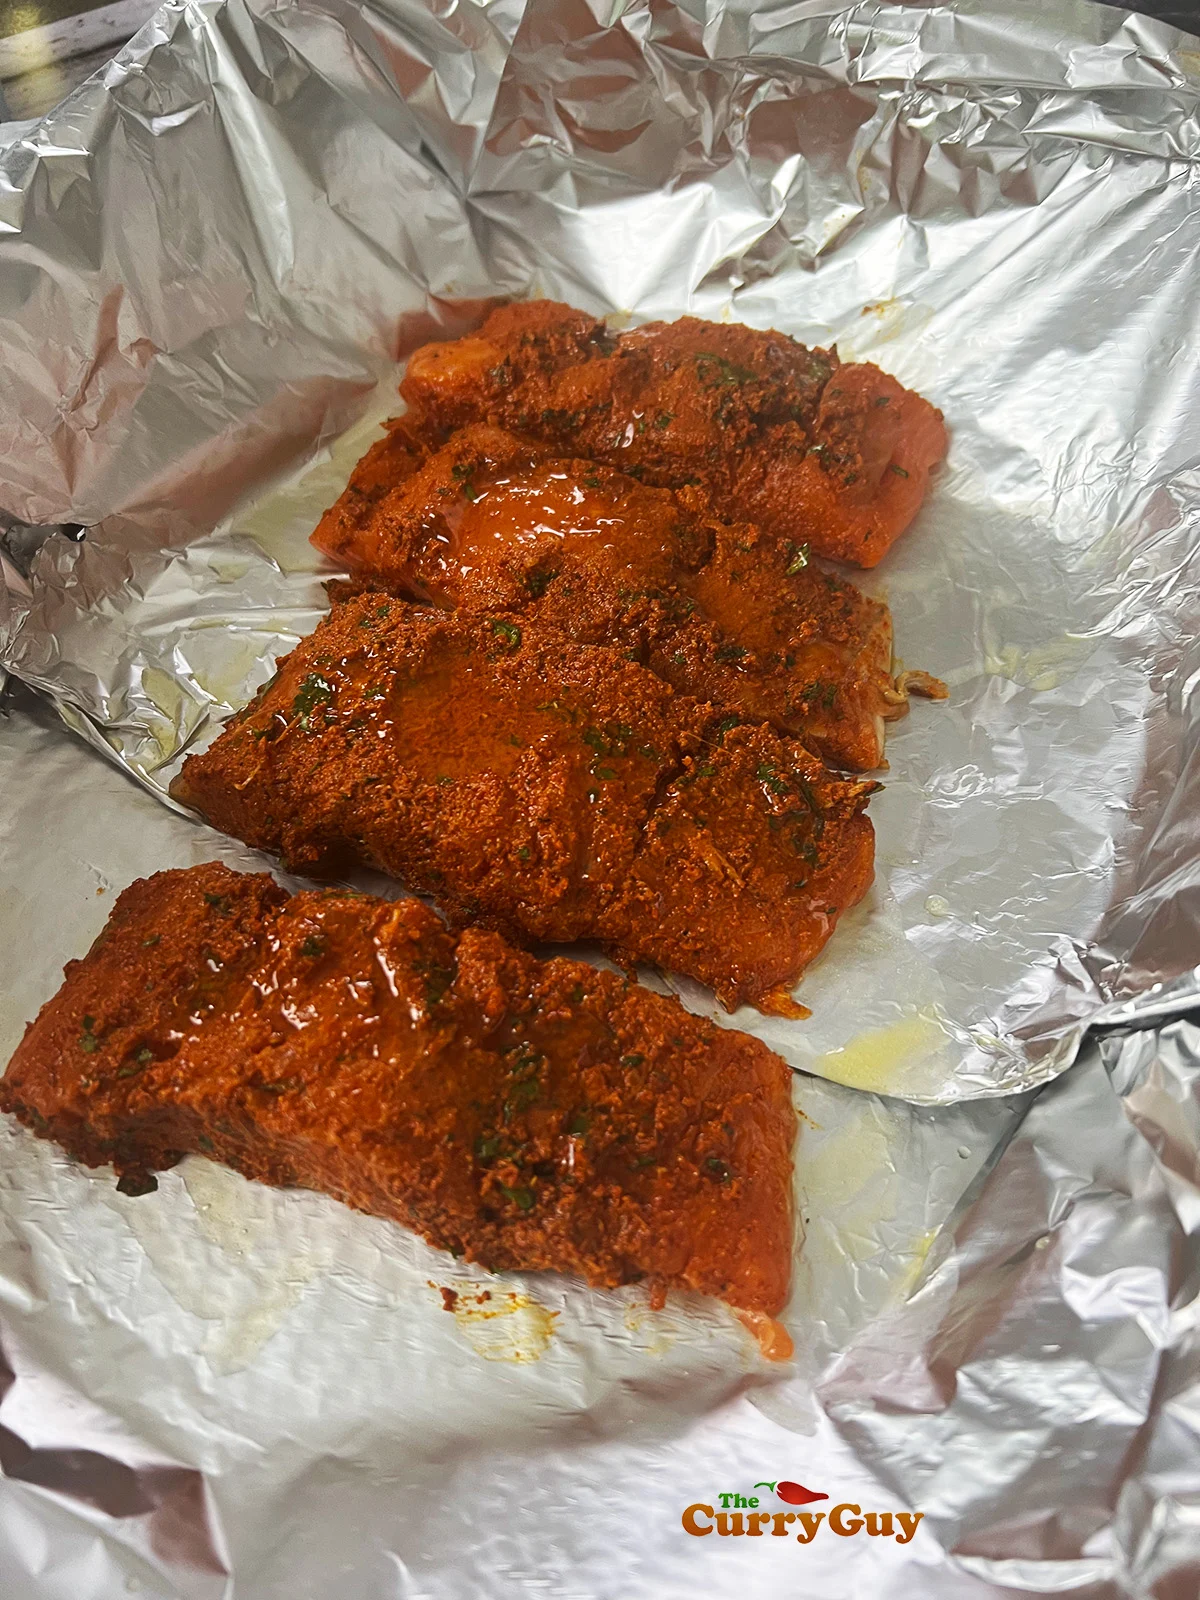 Salmon ready for cooking